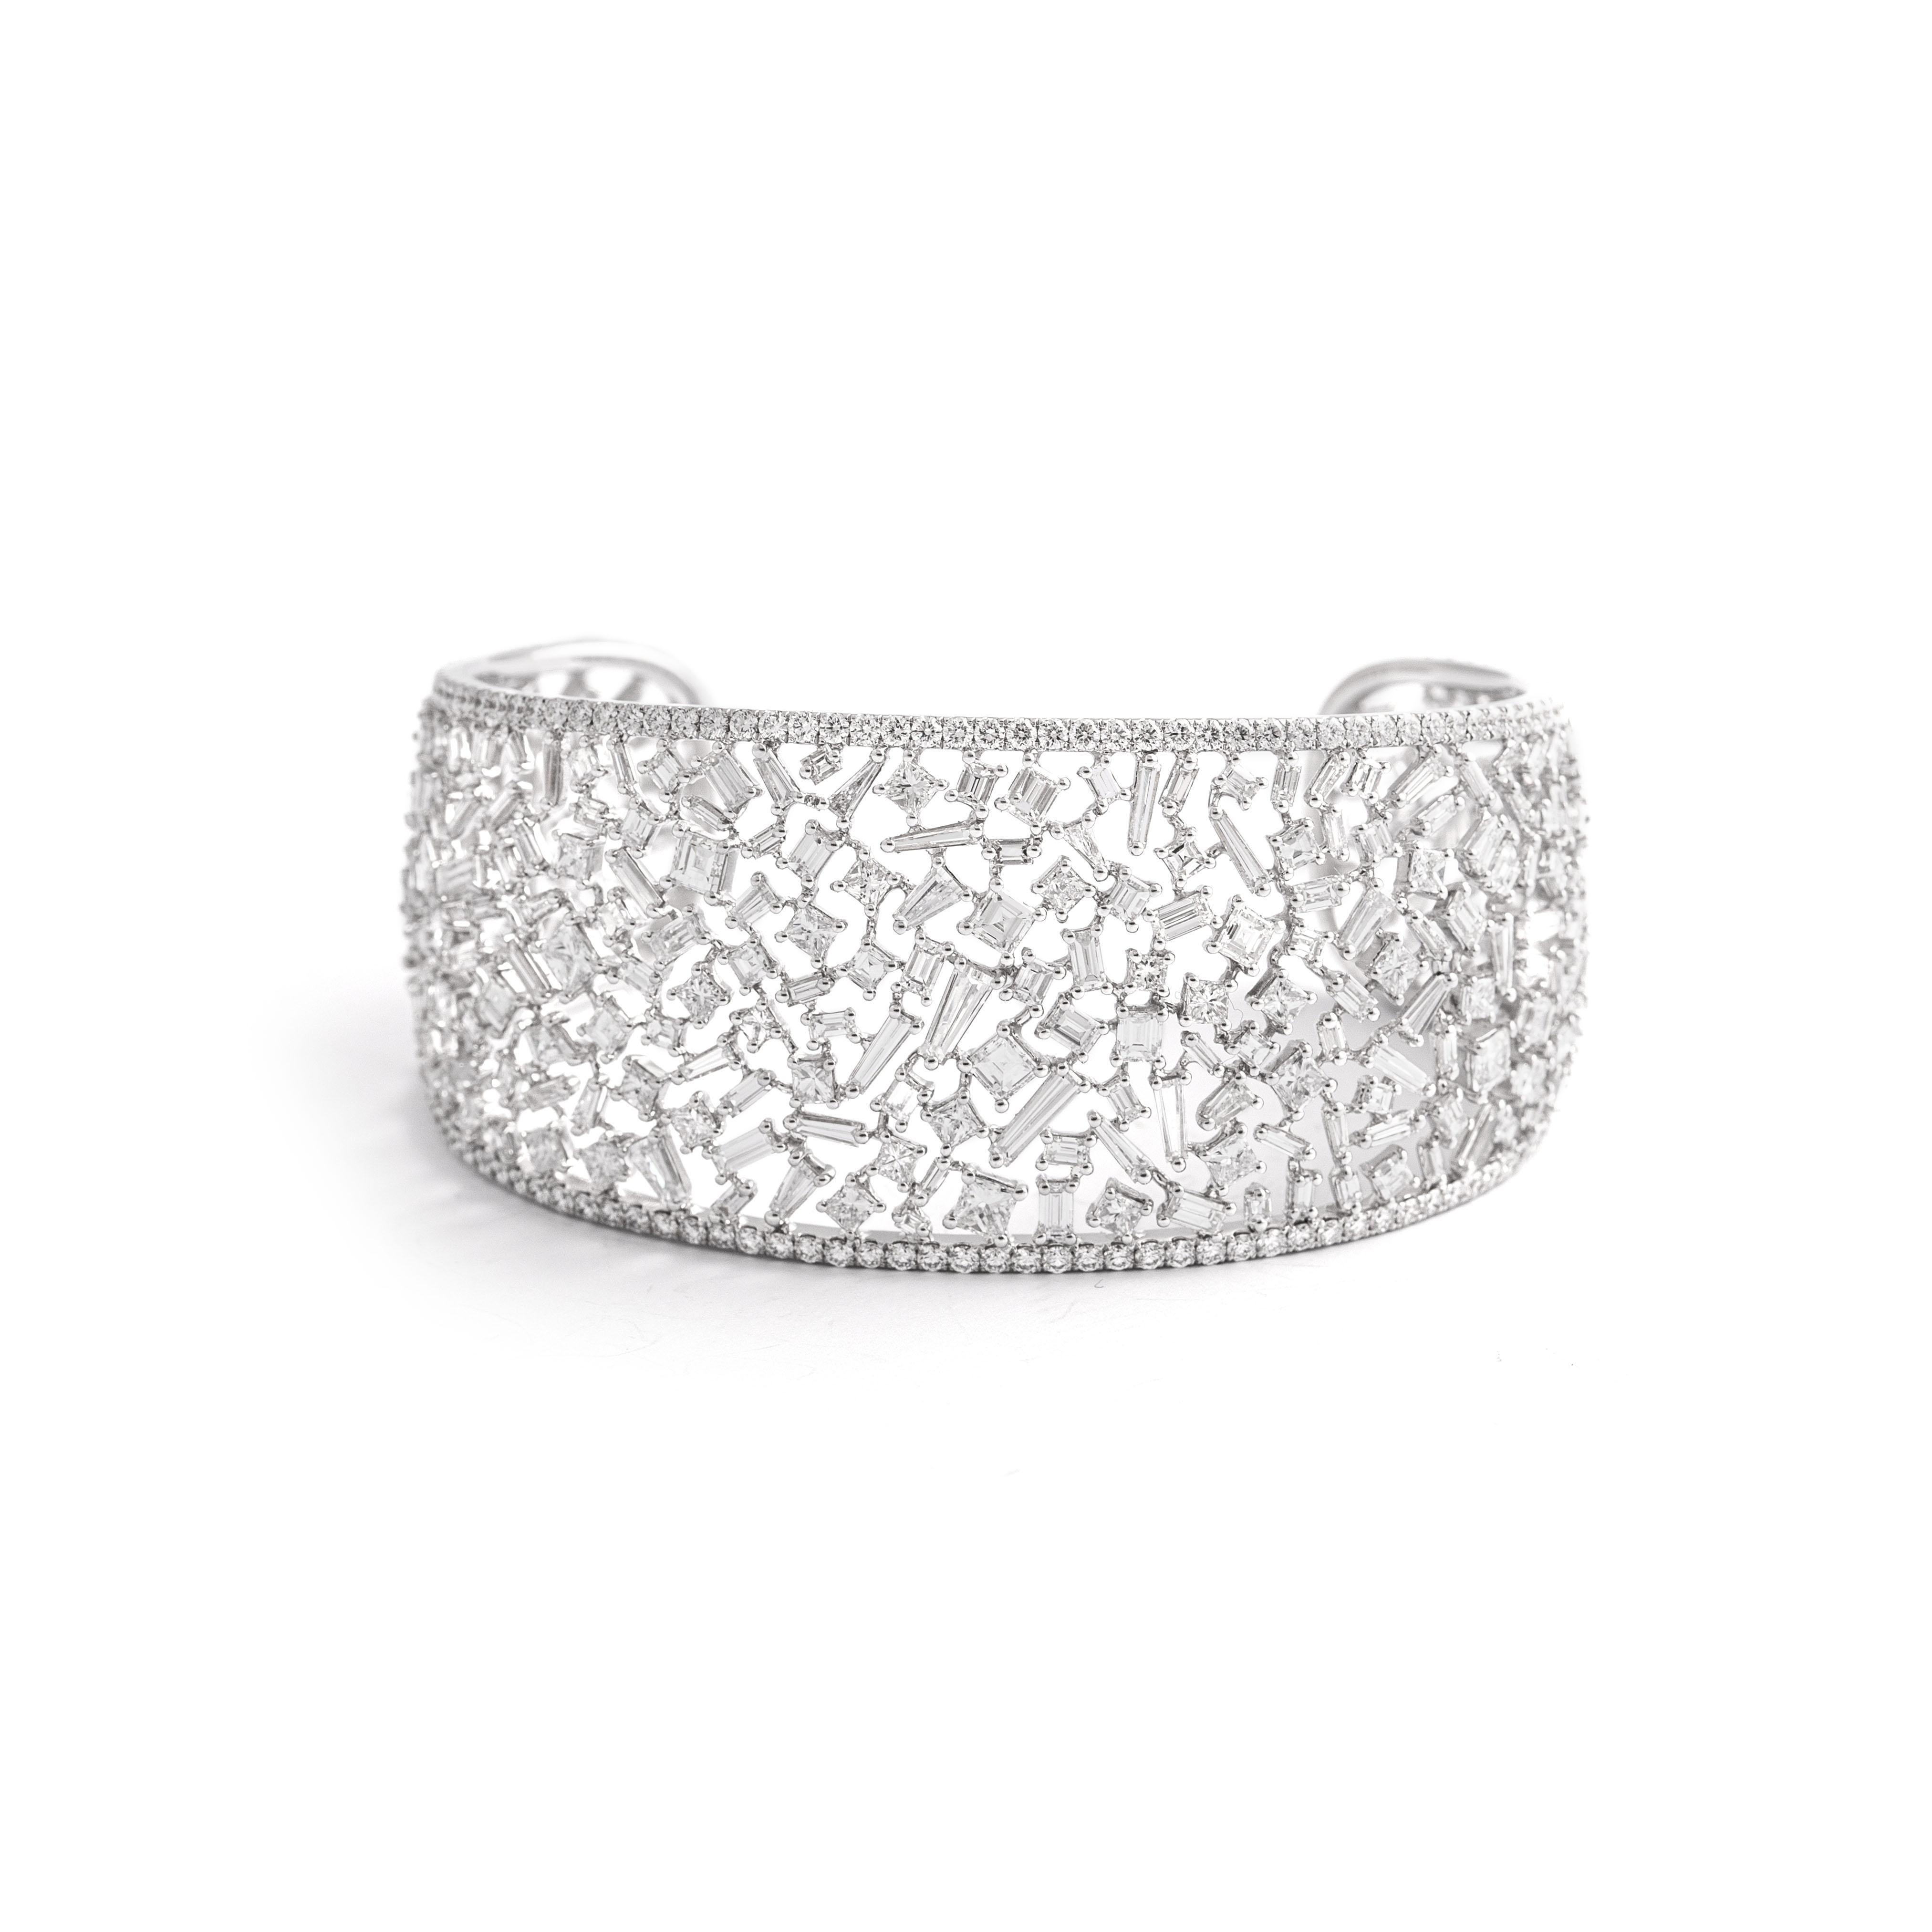 Bangle in 18kt white gold set with 277 diamonds baguette, princess, square and tapers 15.05 cts and 178 diamonds 2.96 cts.

Inner circumference: Approximately 15.7 centimeters (6.18 inches).

Note: Flexible Bracelet.

Total weight: 28.15